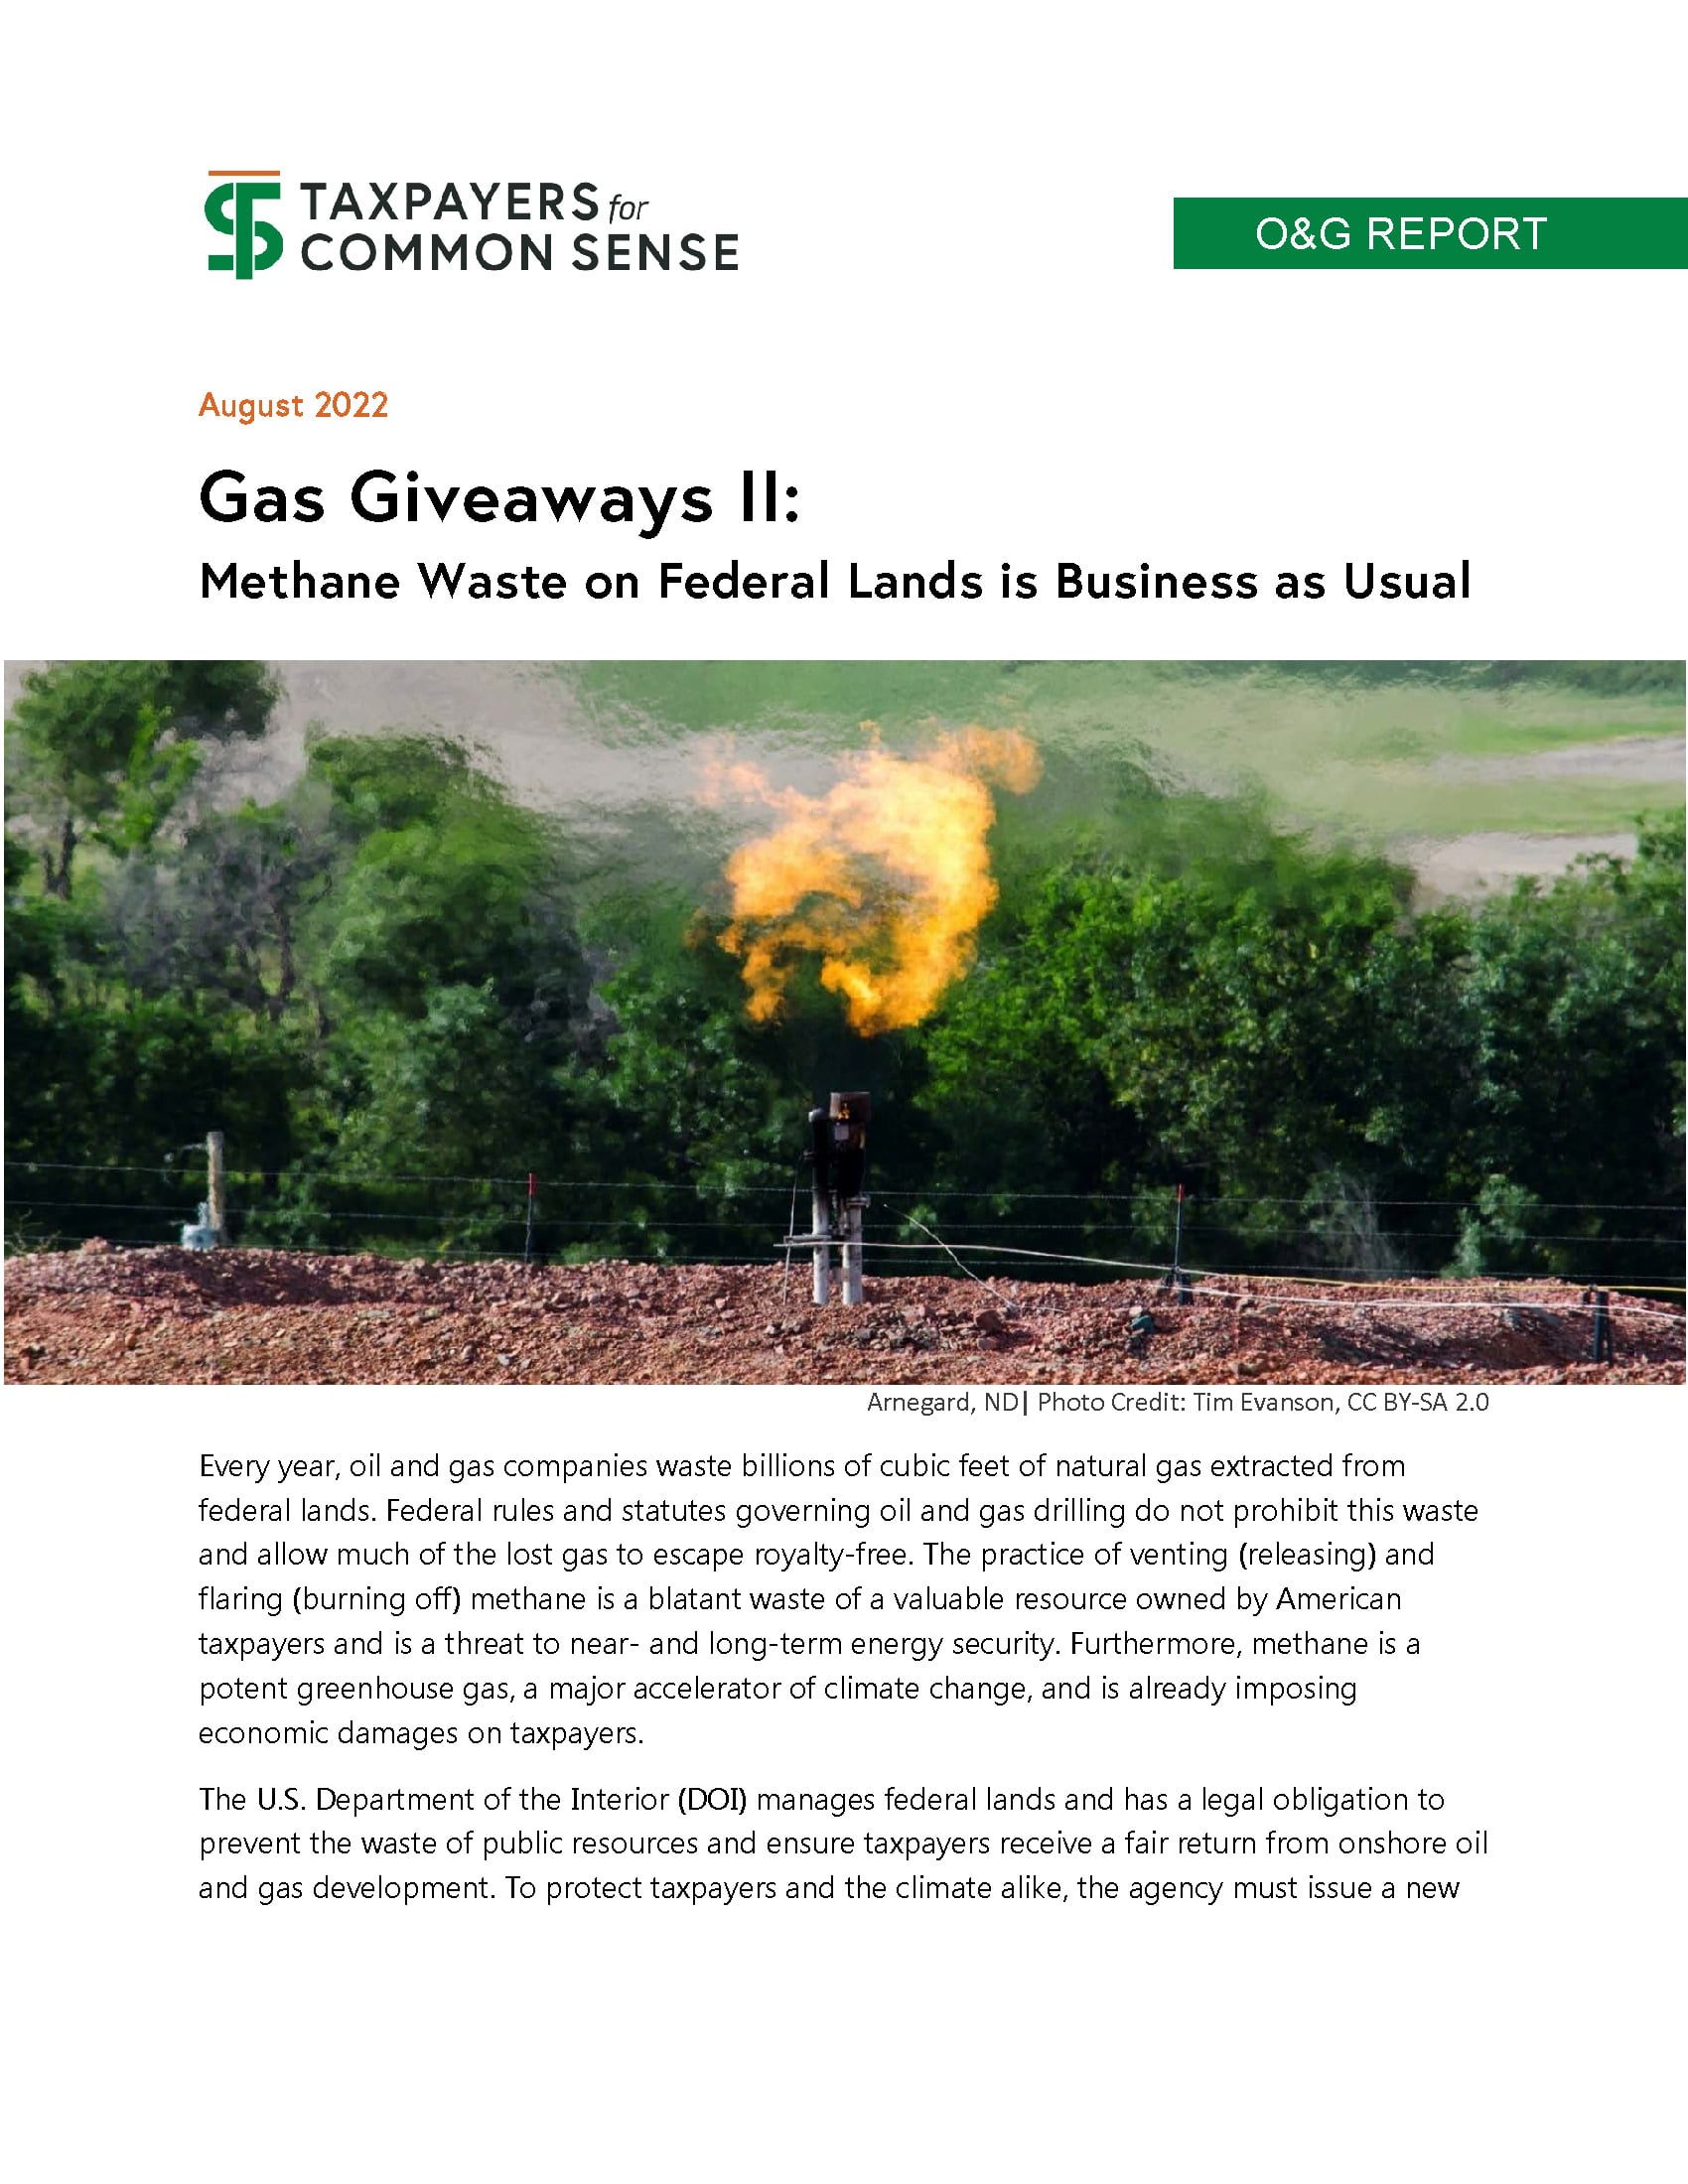 Cover of Gas Giveaways 2 Report